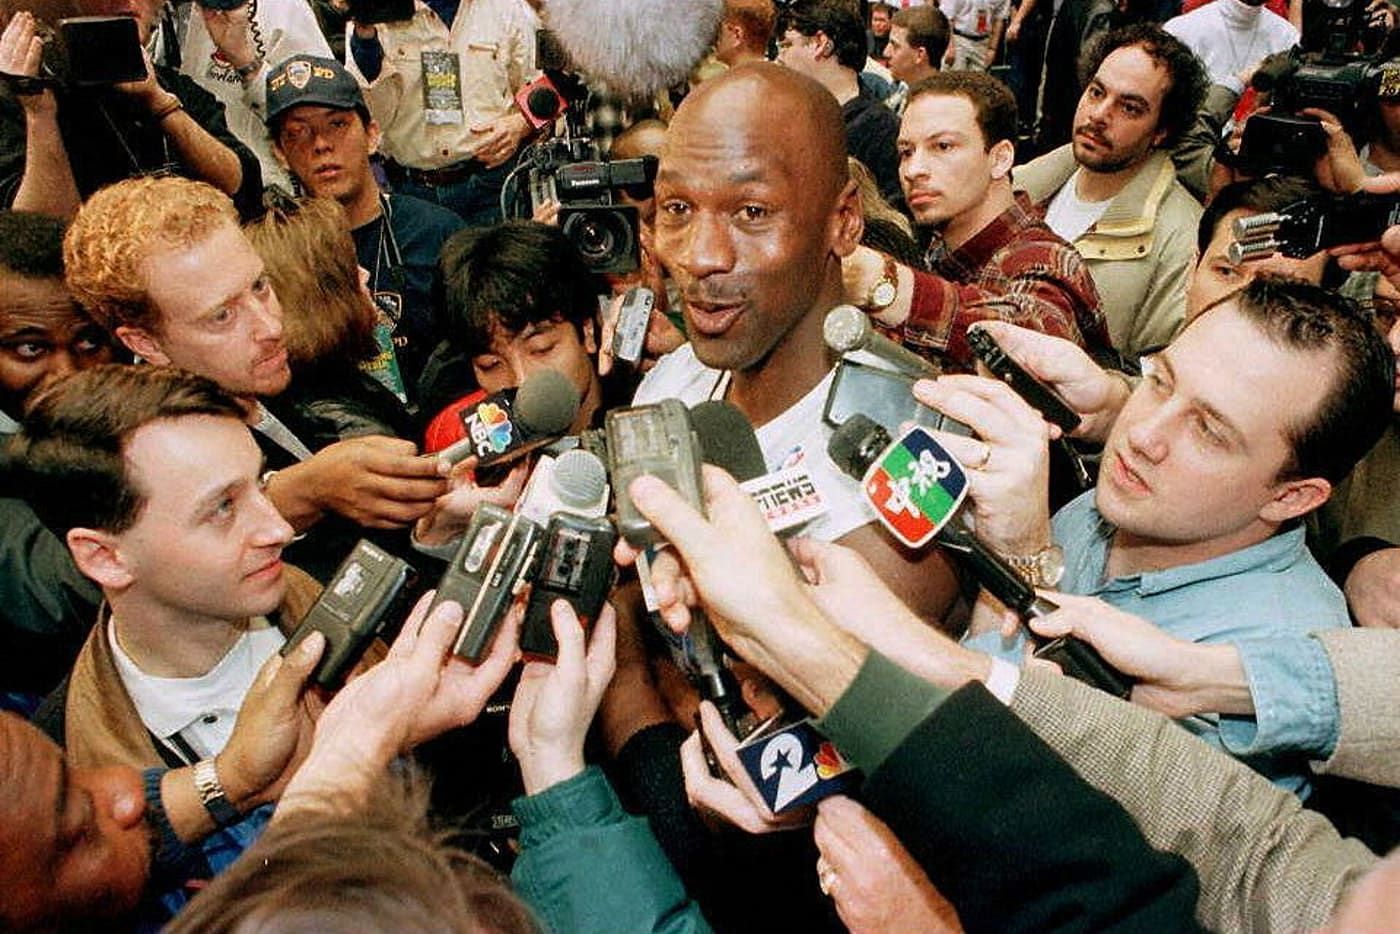 BJ Armstrong: Michael Jordan created a persona which allowed him to become  the best version of himself and deal with trappings of superstardom, NBA  News